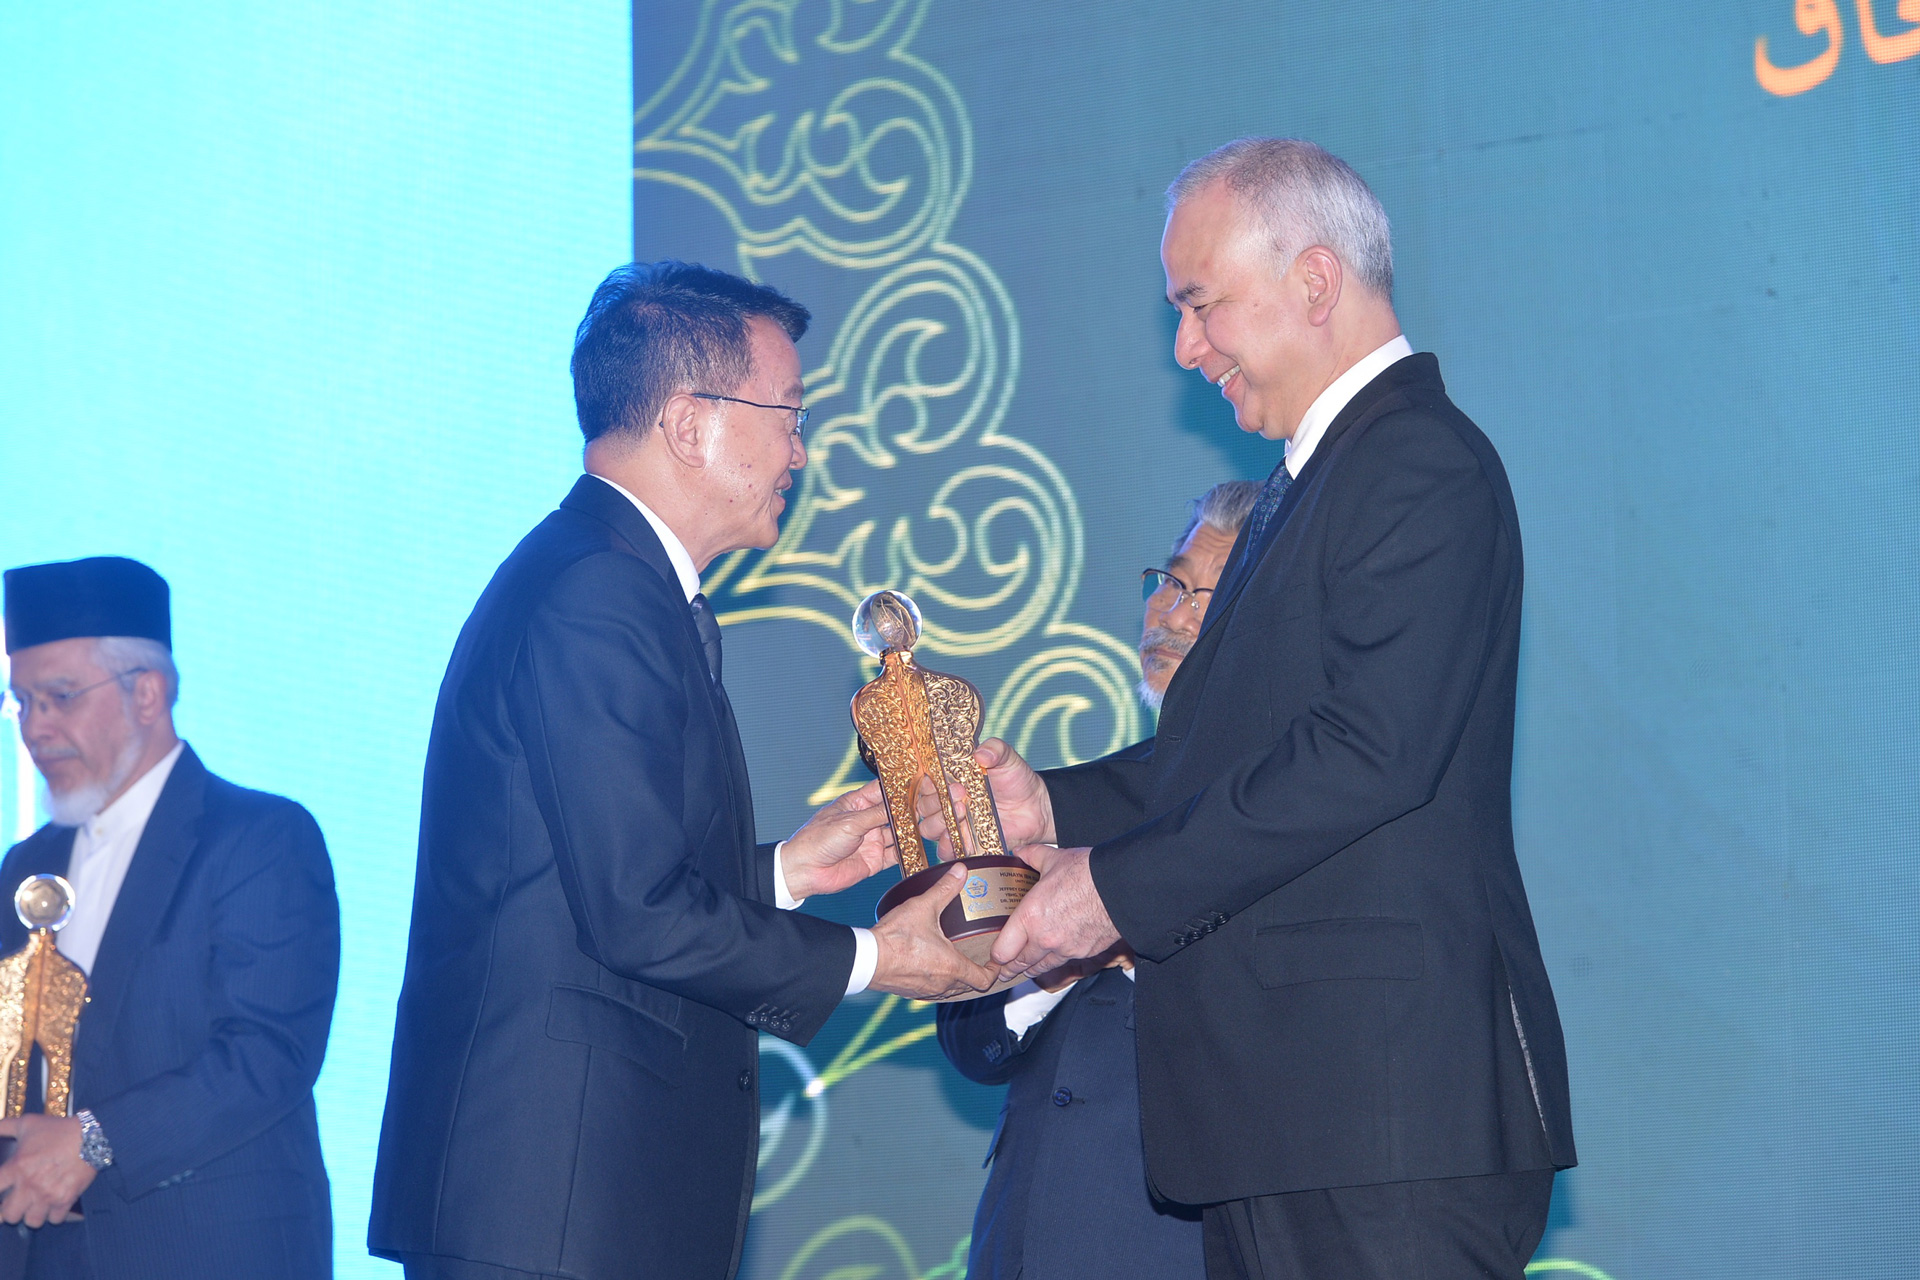 Tan Sri Dr Jeffrey Cheah, First and Only Non-Muslim to Receive Unity Award at Islamic Excellence Awards